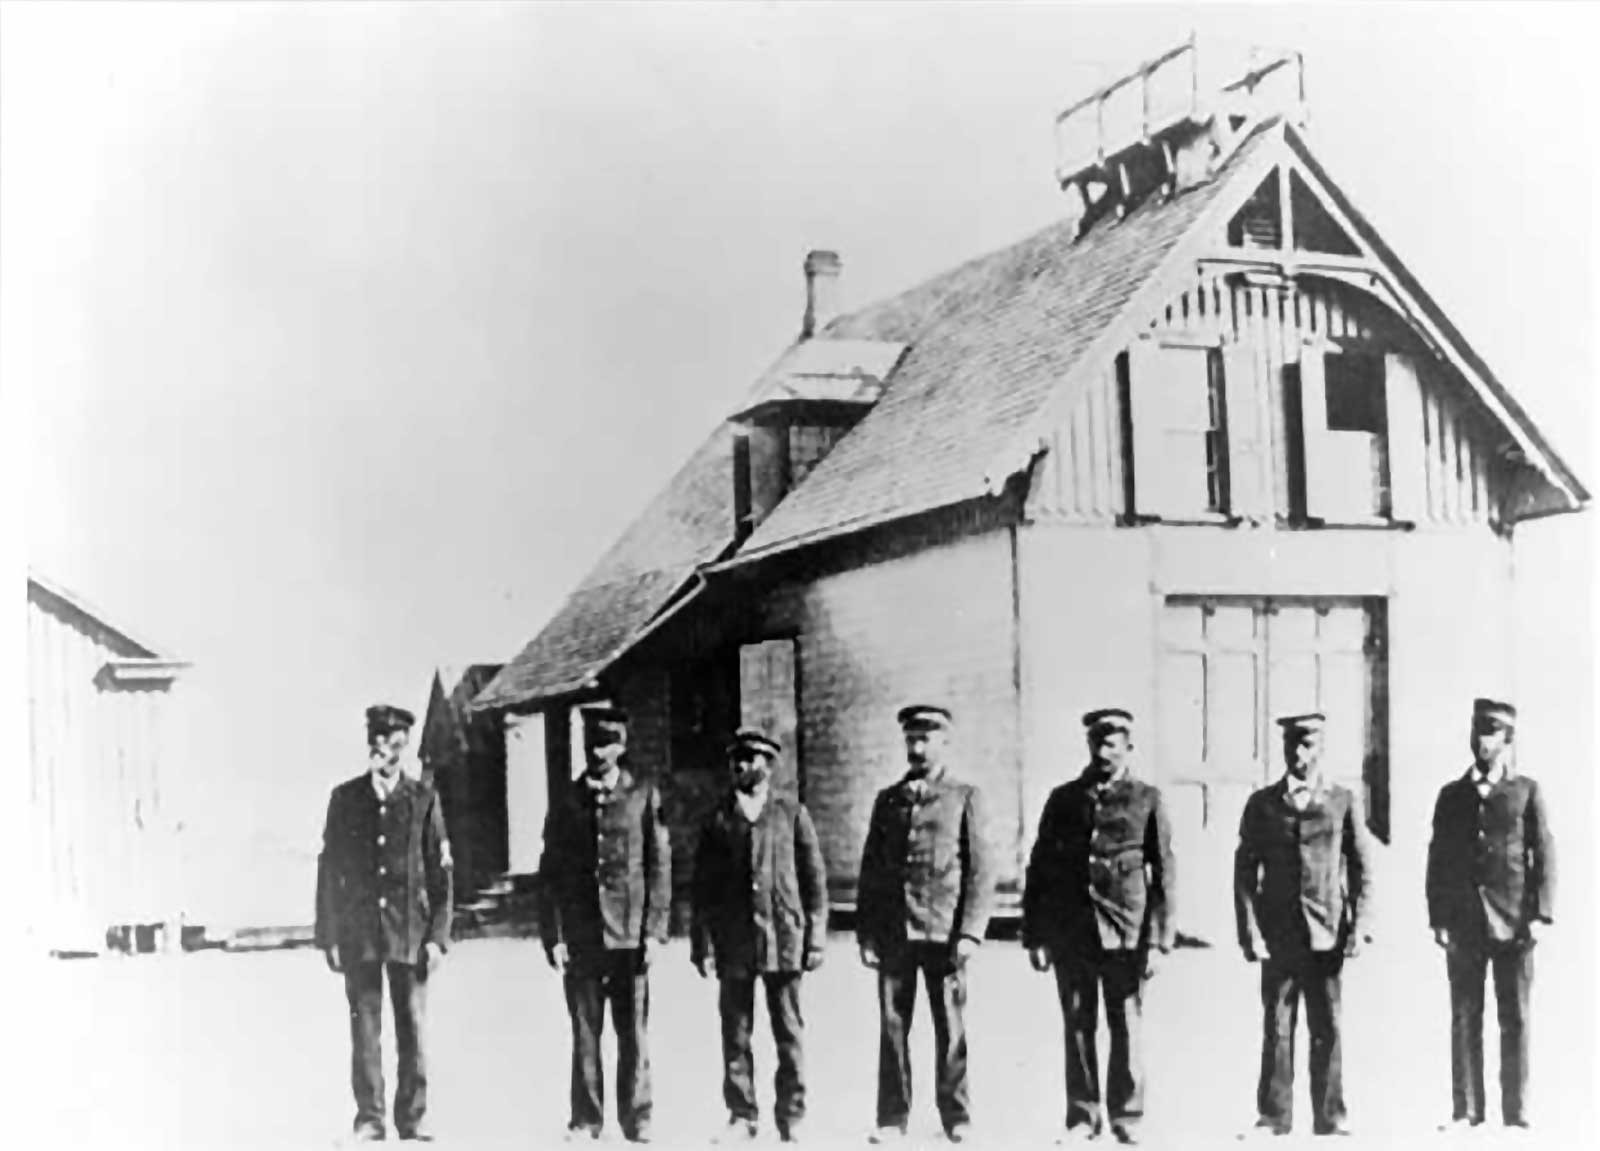 Keeper Richard Etheridge (on left) and the Pea Island Life-Saving crew in front of their station, circa 1896